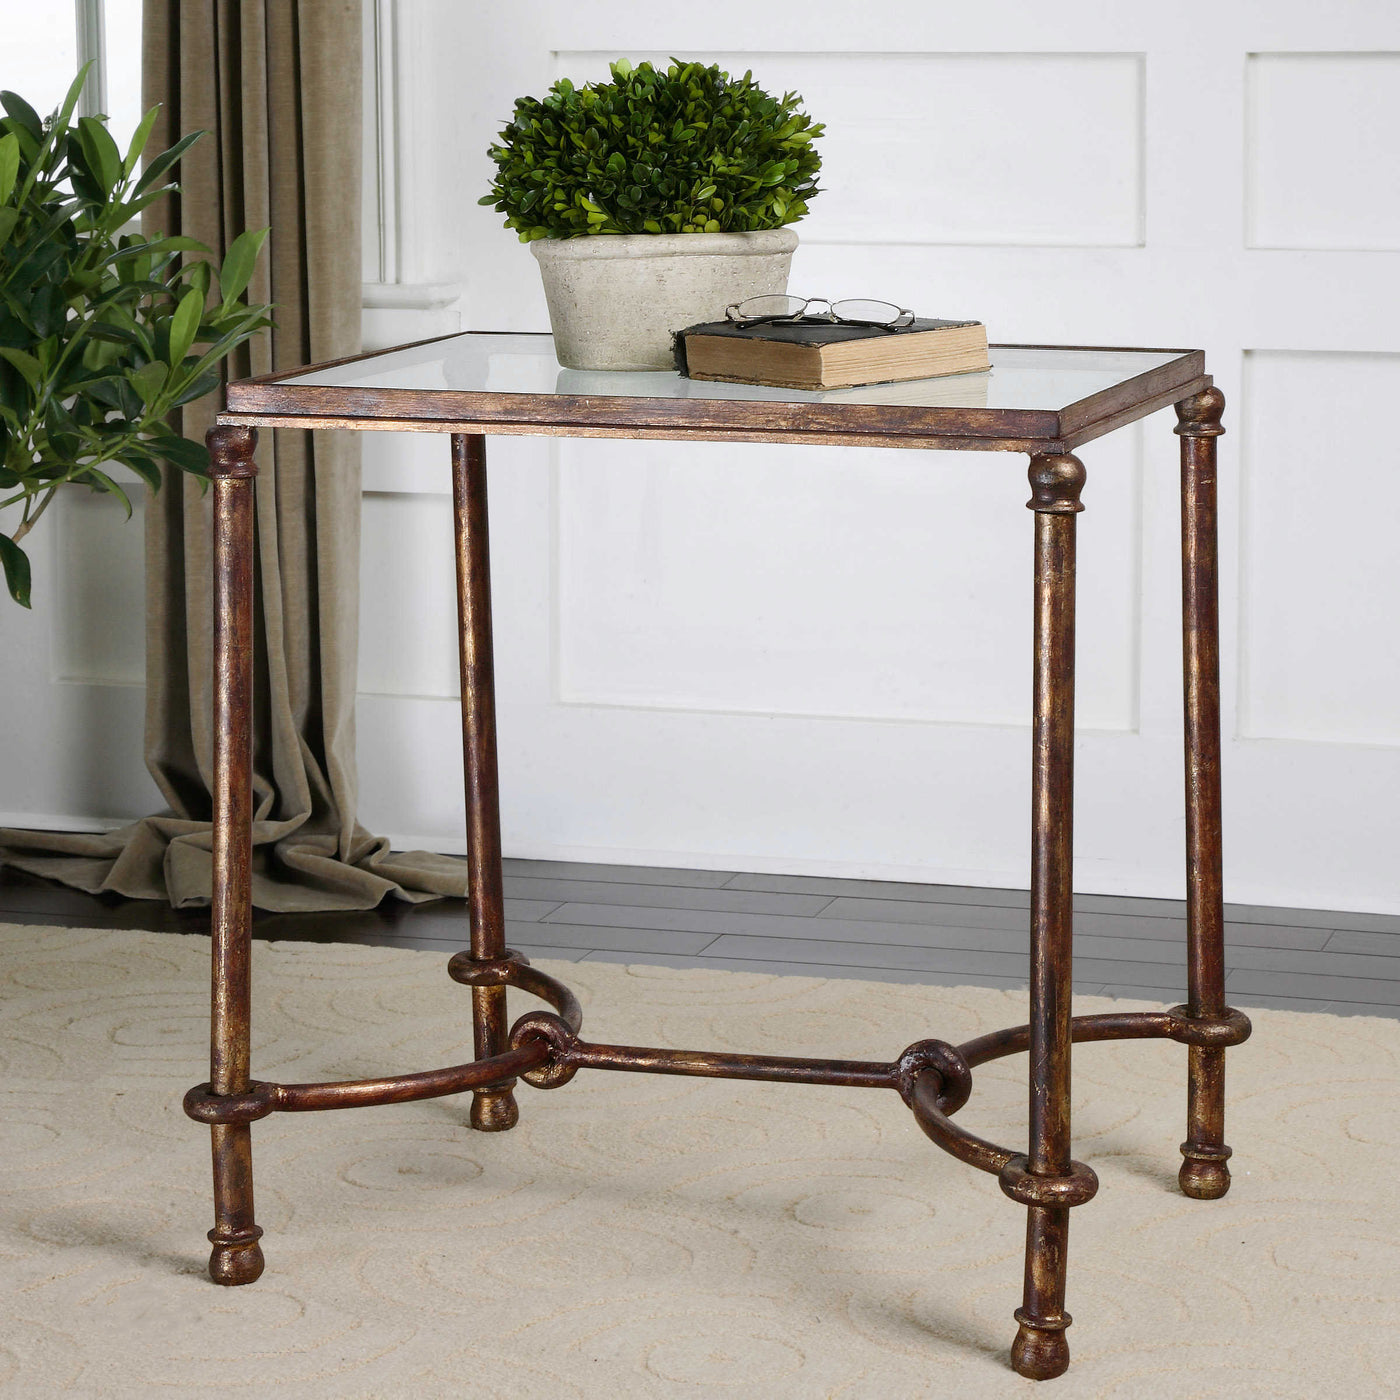 Inspired By Ancient Horse Bridles, This Forged Iron End Table Is A Blending Of Rings And Curves Finished In Rustic Bronze ...